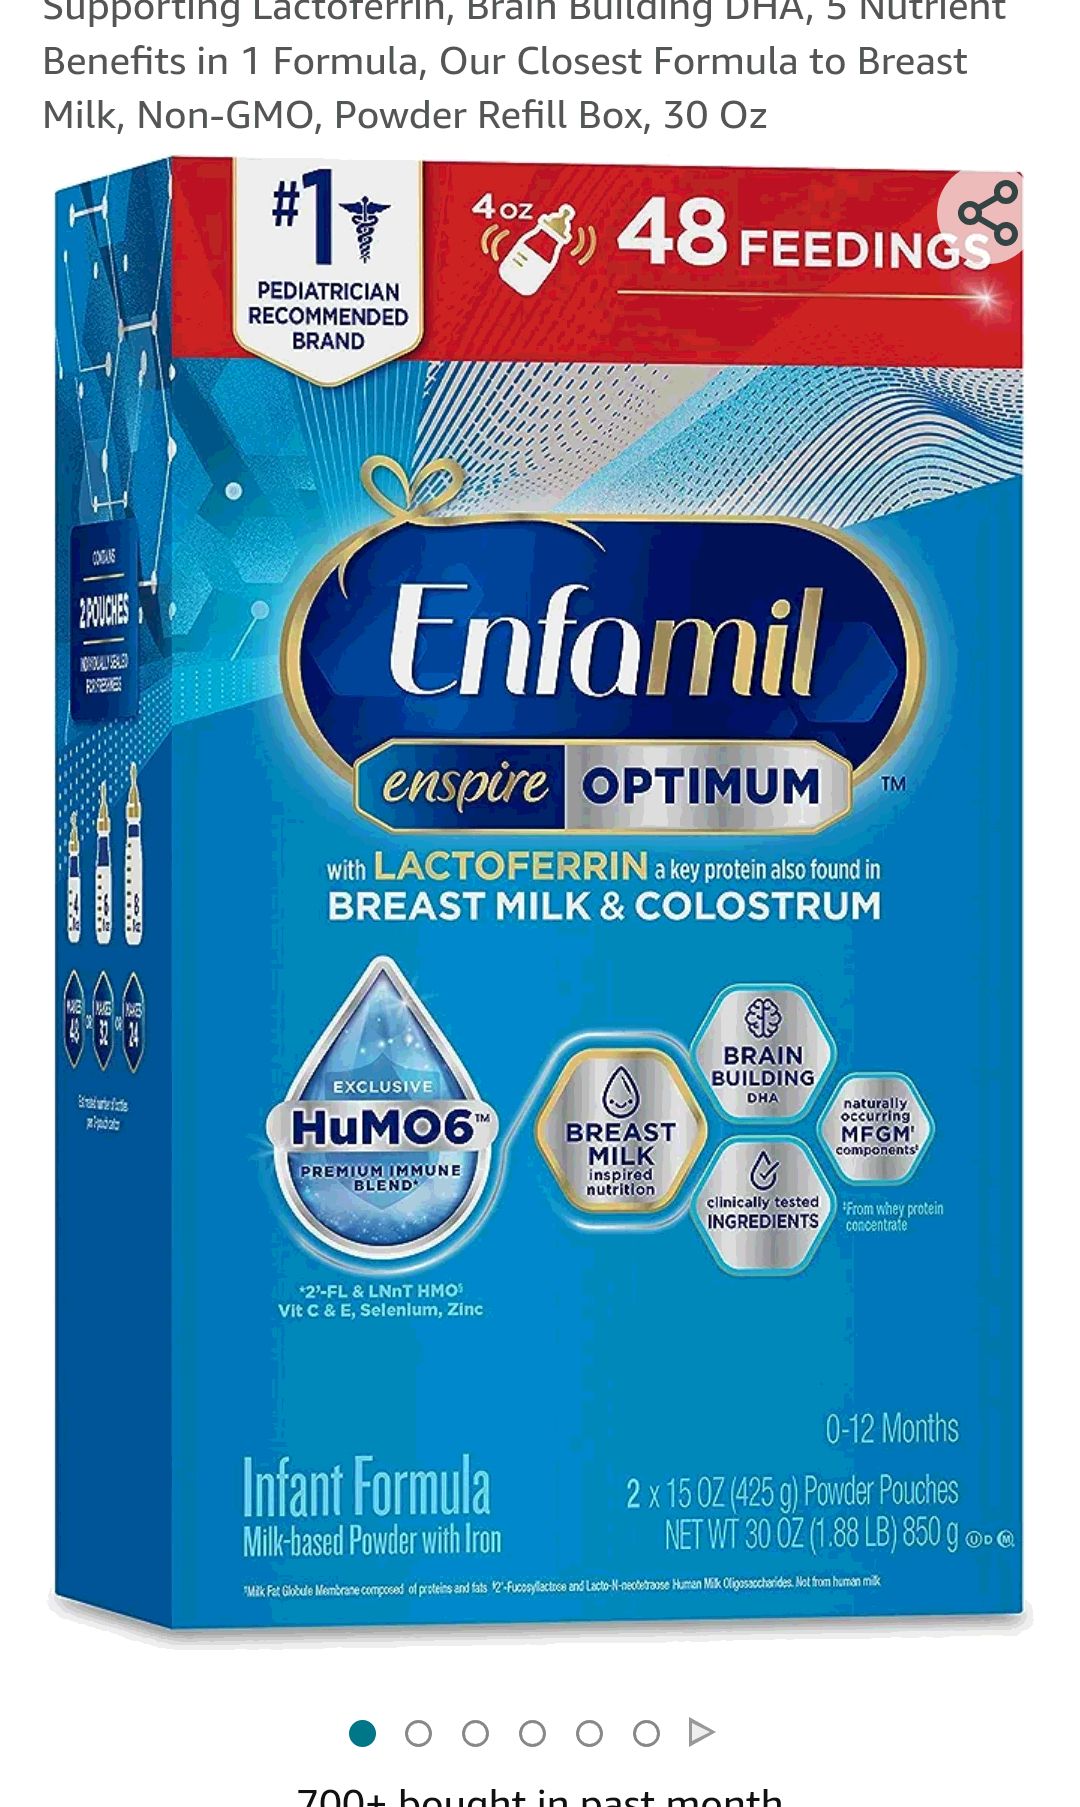 Enfamil Enspire Infant Formula with Immune-Supporting Lactoferrin, Brain Building DHA, 5 Nutrient Benefits in 1 Formula, Our Closest Formula to Breast Milk, Non-GMO, Powder Refill Box, 30 Oz : Baby